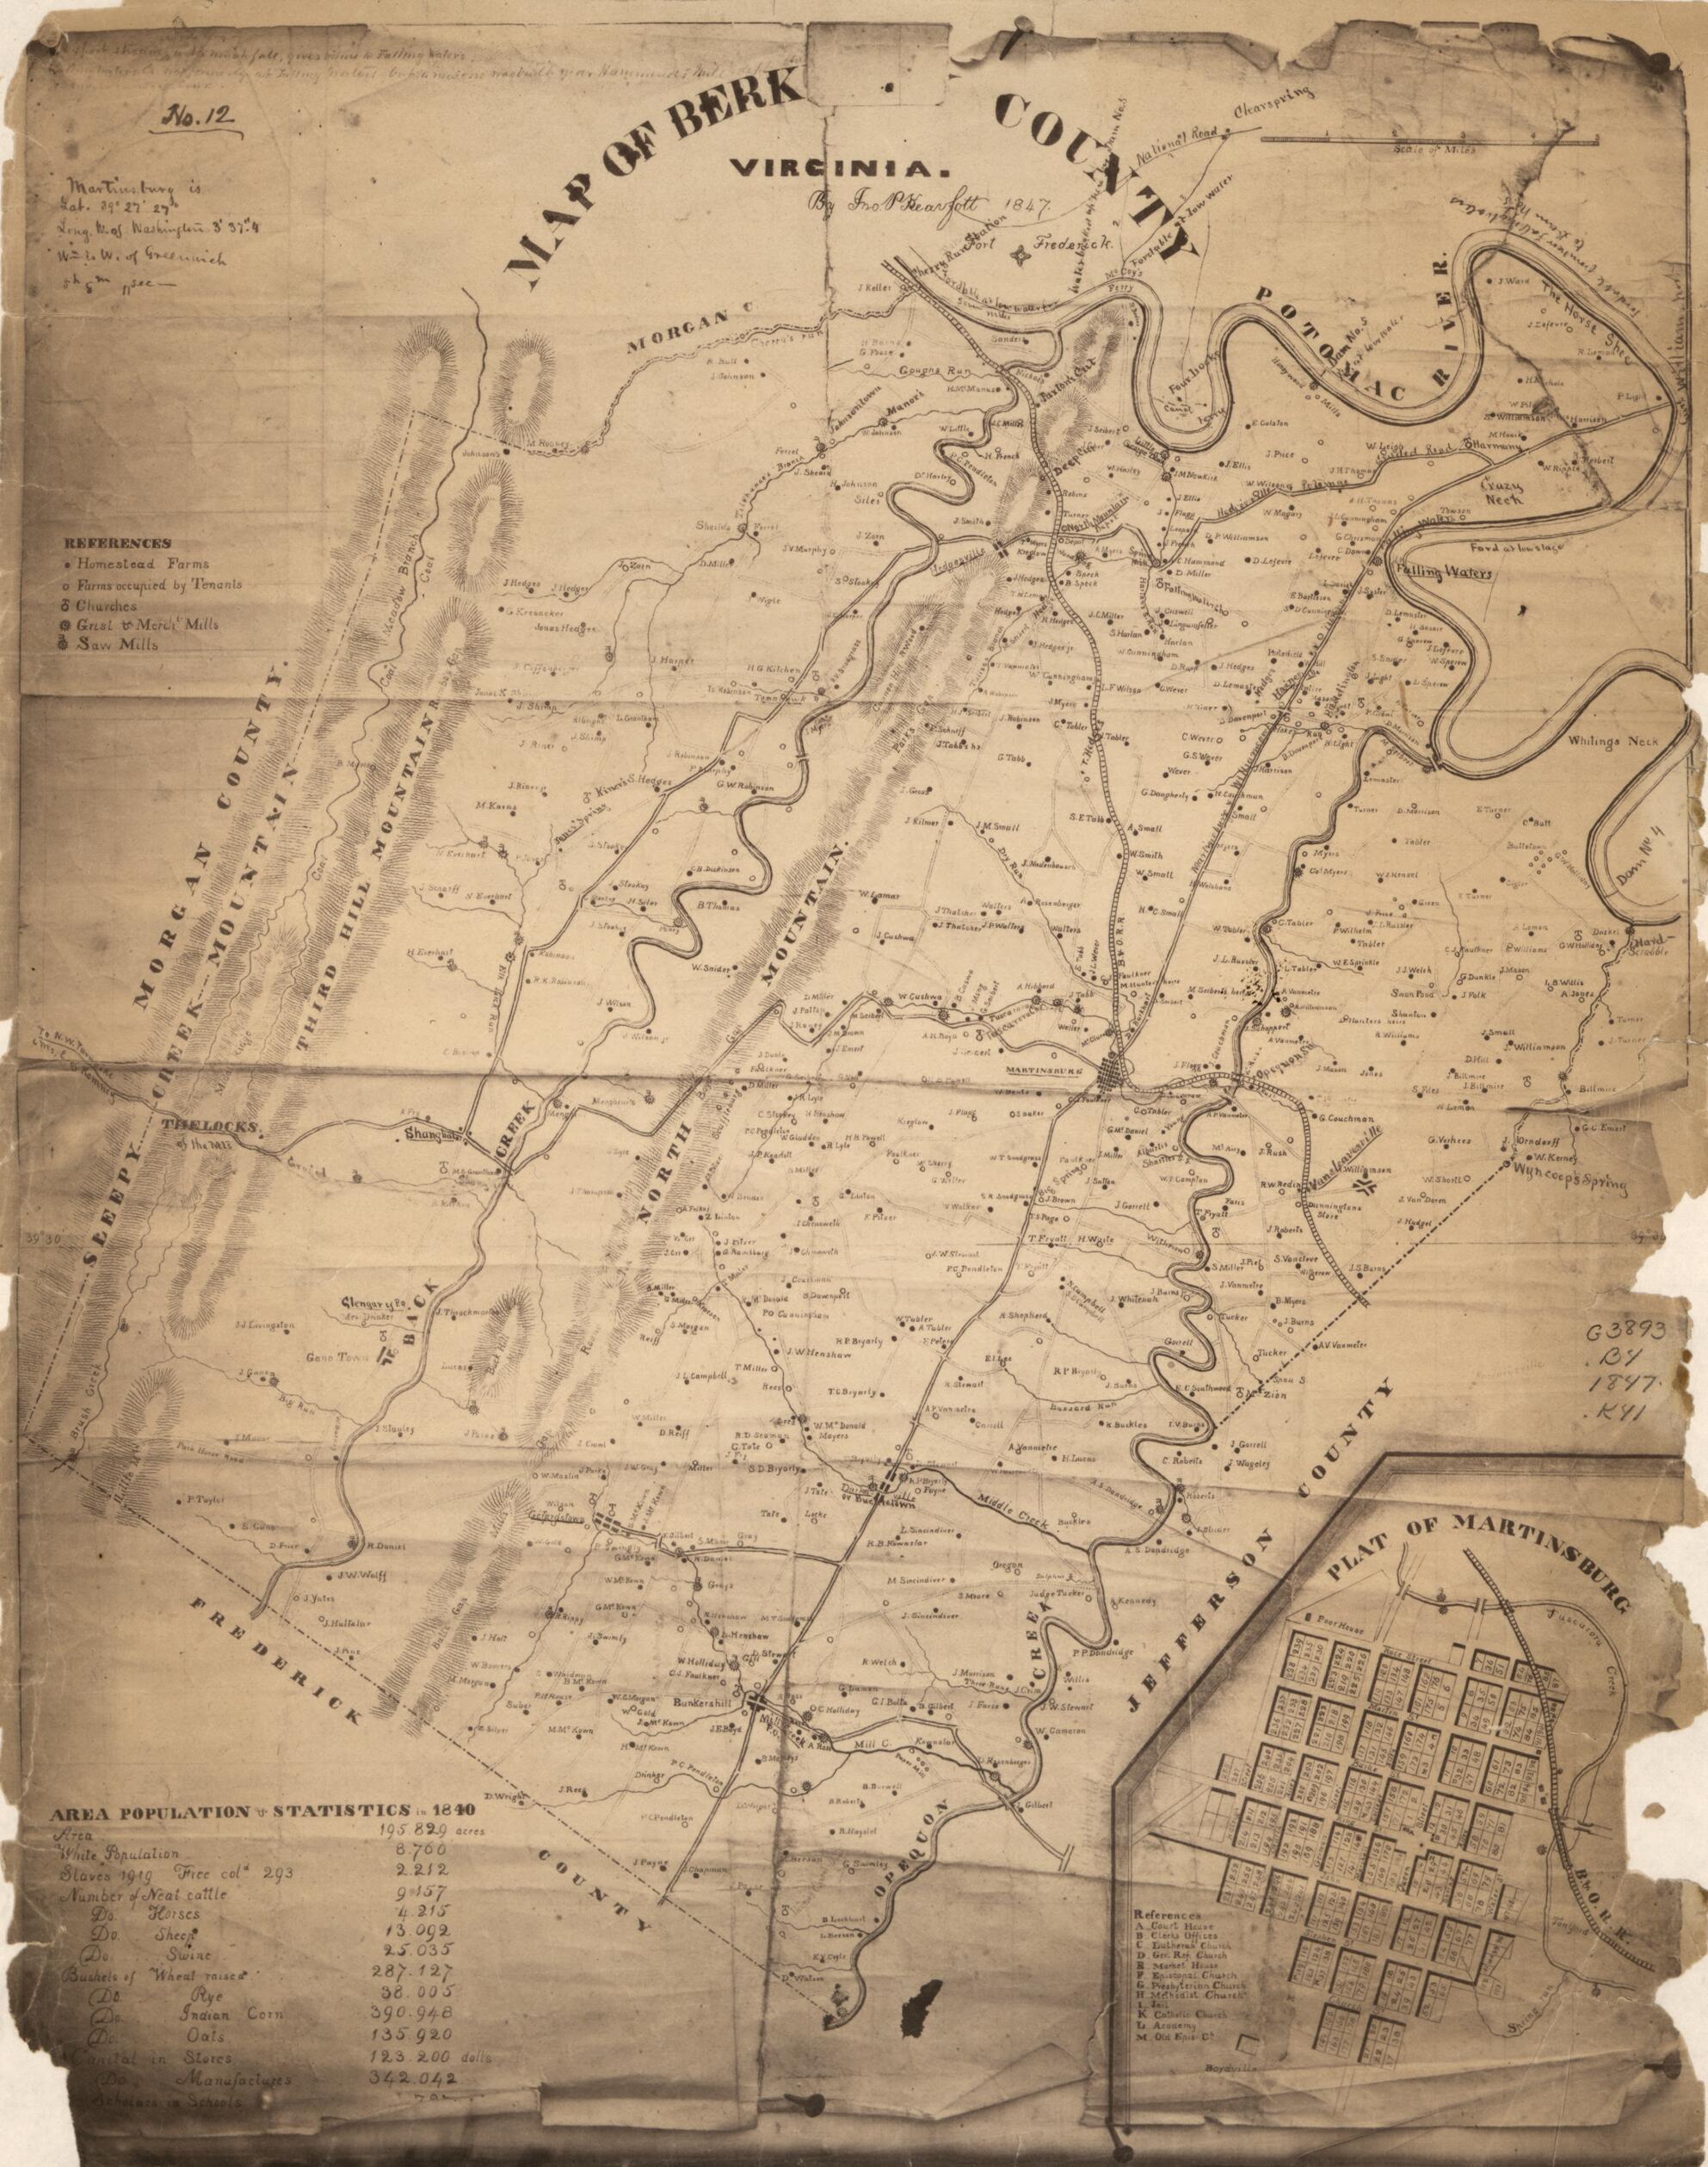 This old map of Map of Berkeley County, Virginia (Map of Berkeley, County, Virginia) from 1847 was created by Jno P. Kearfott in 1847